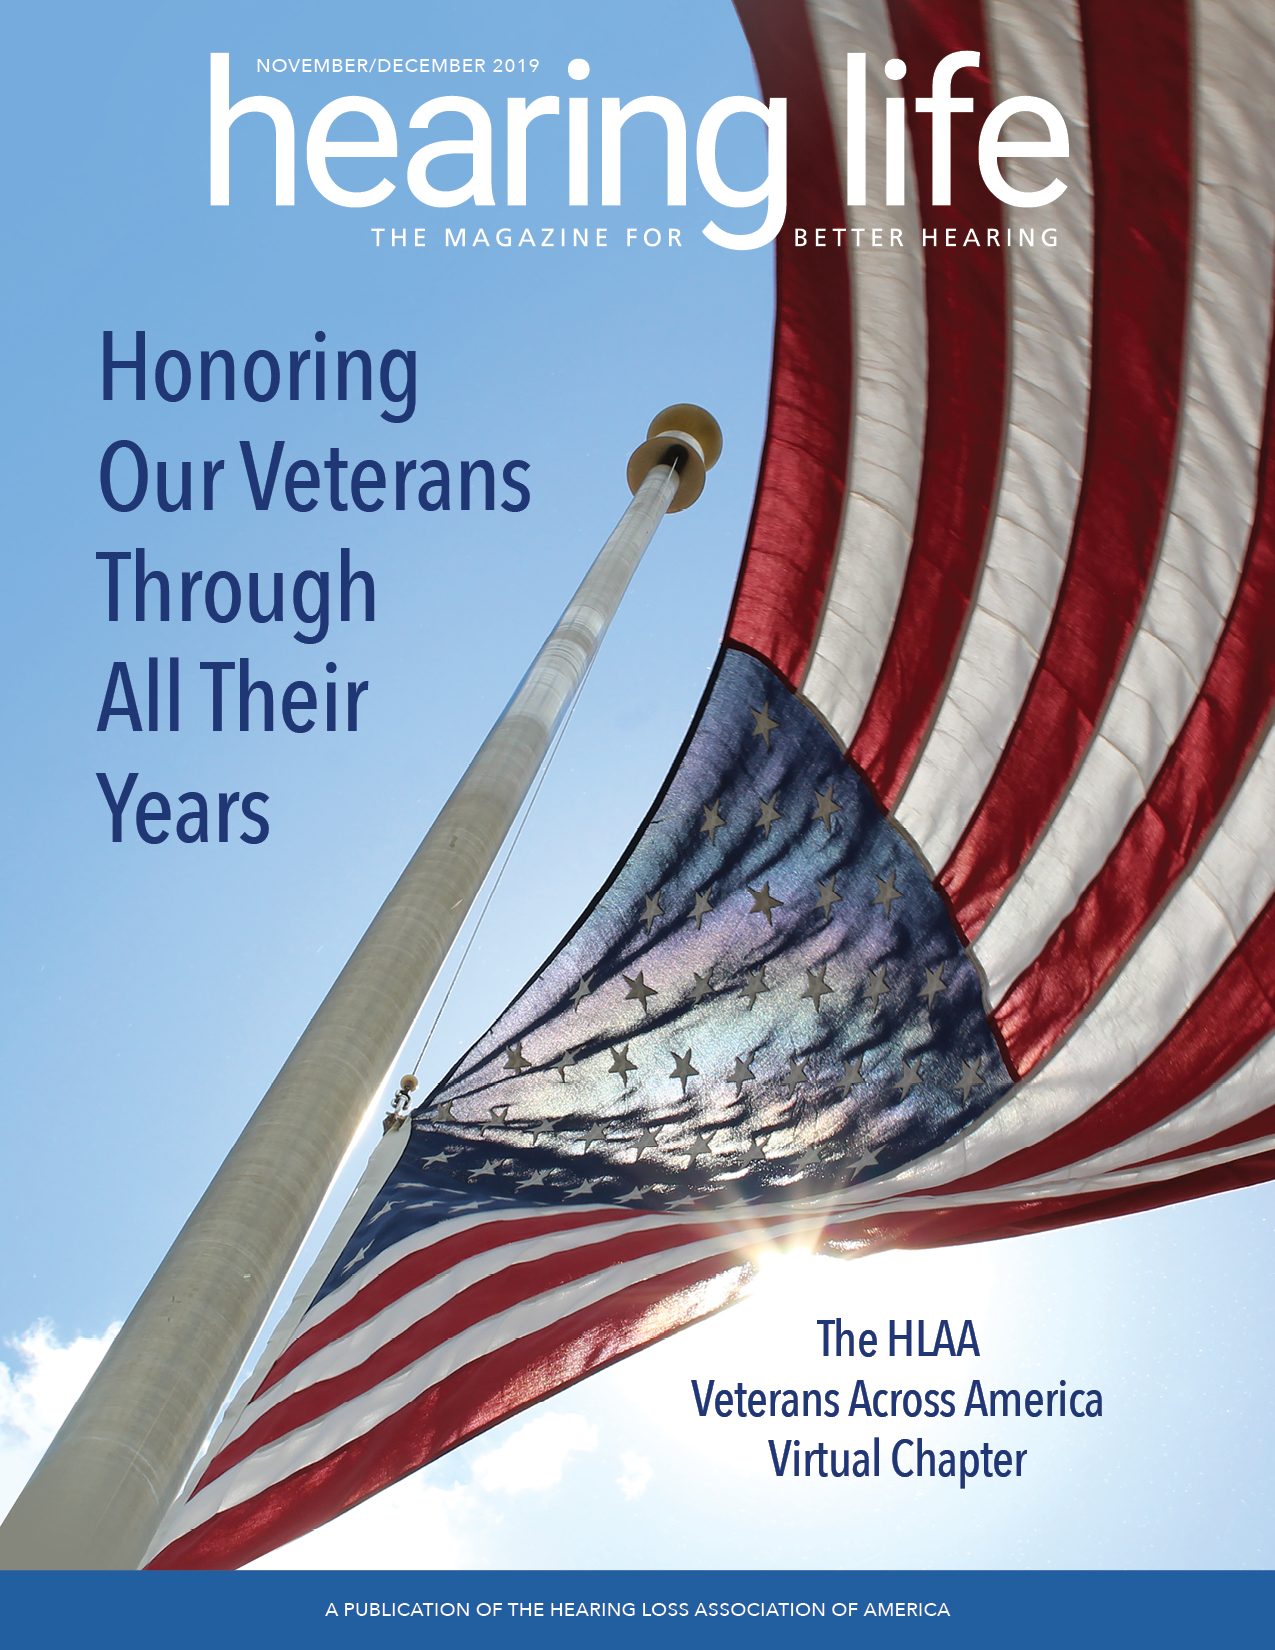 HLAA Hearing Life 2019 November/December Cover with an American flag waving in the wind with blue skies